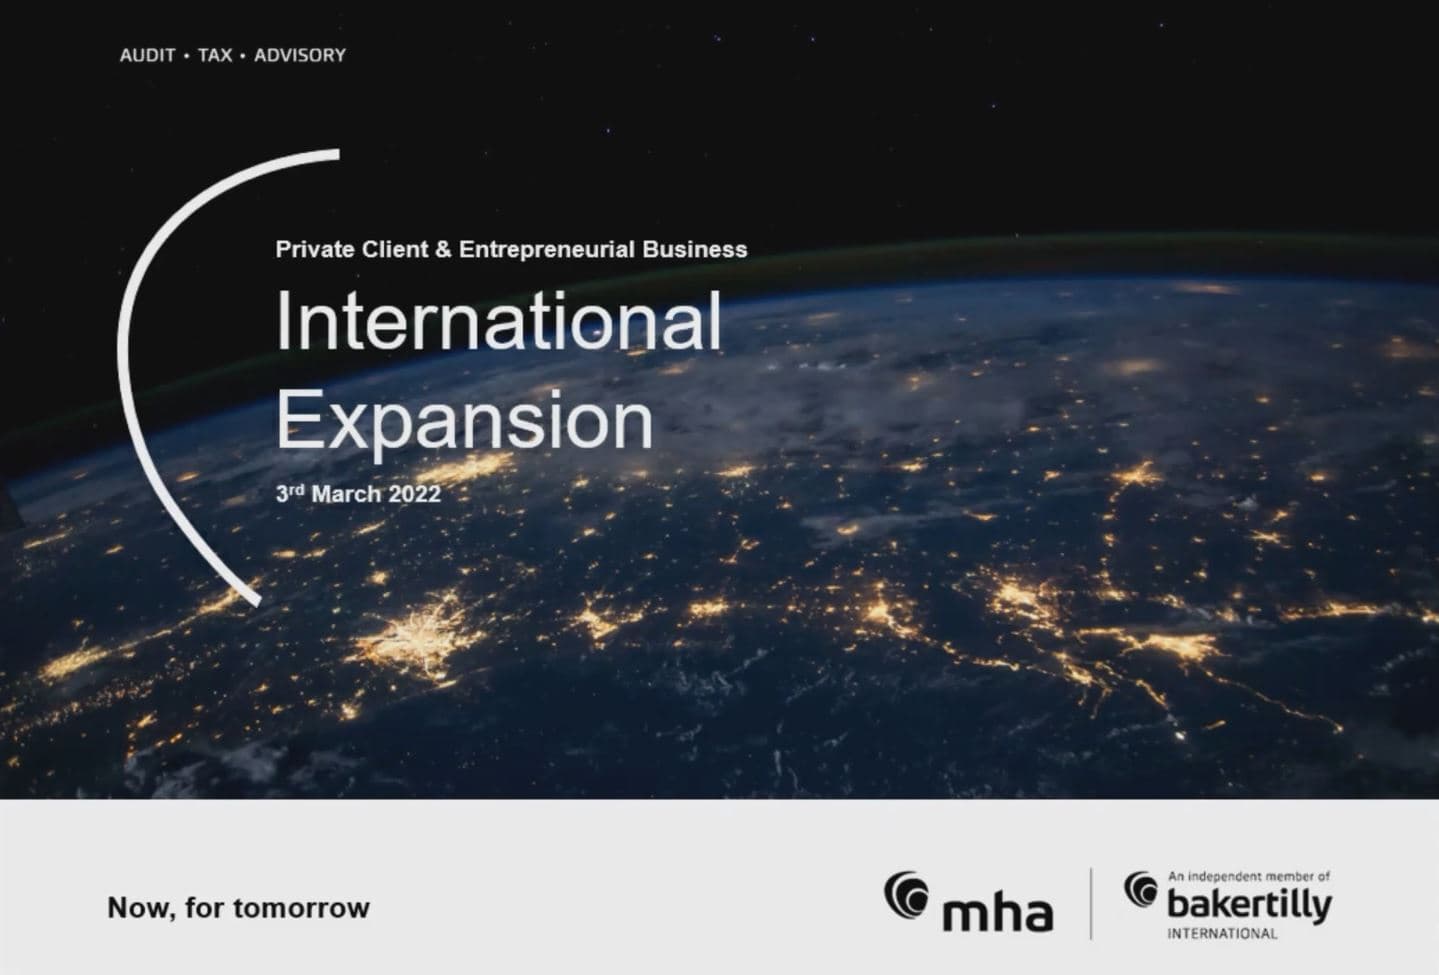 Private Client & Entrepreneurial Business: International Expansion